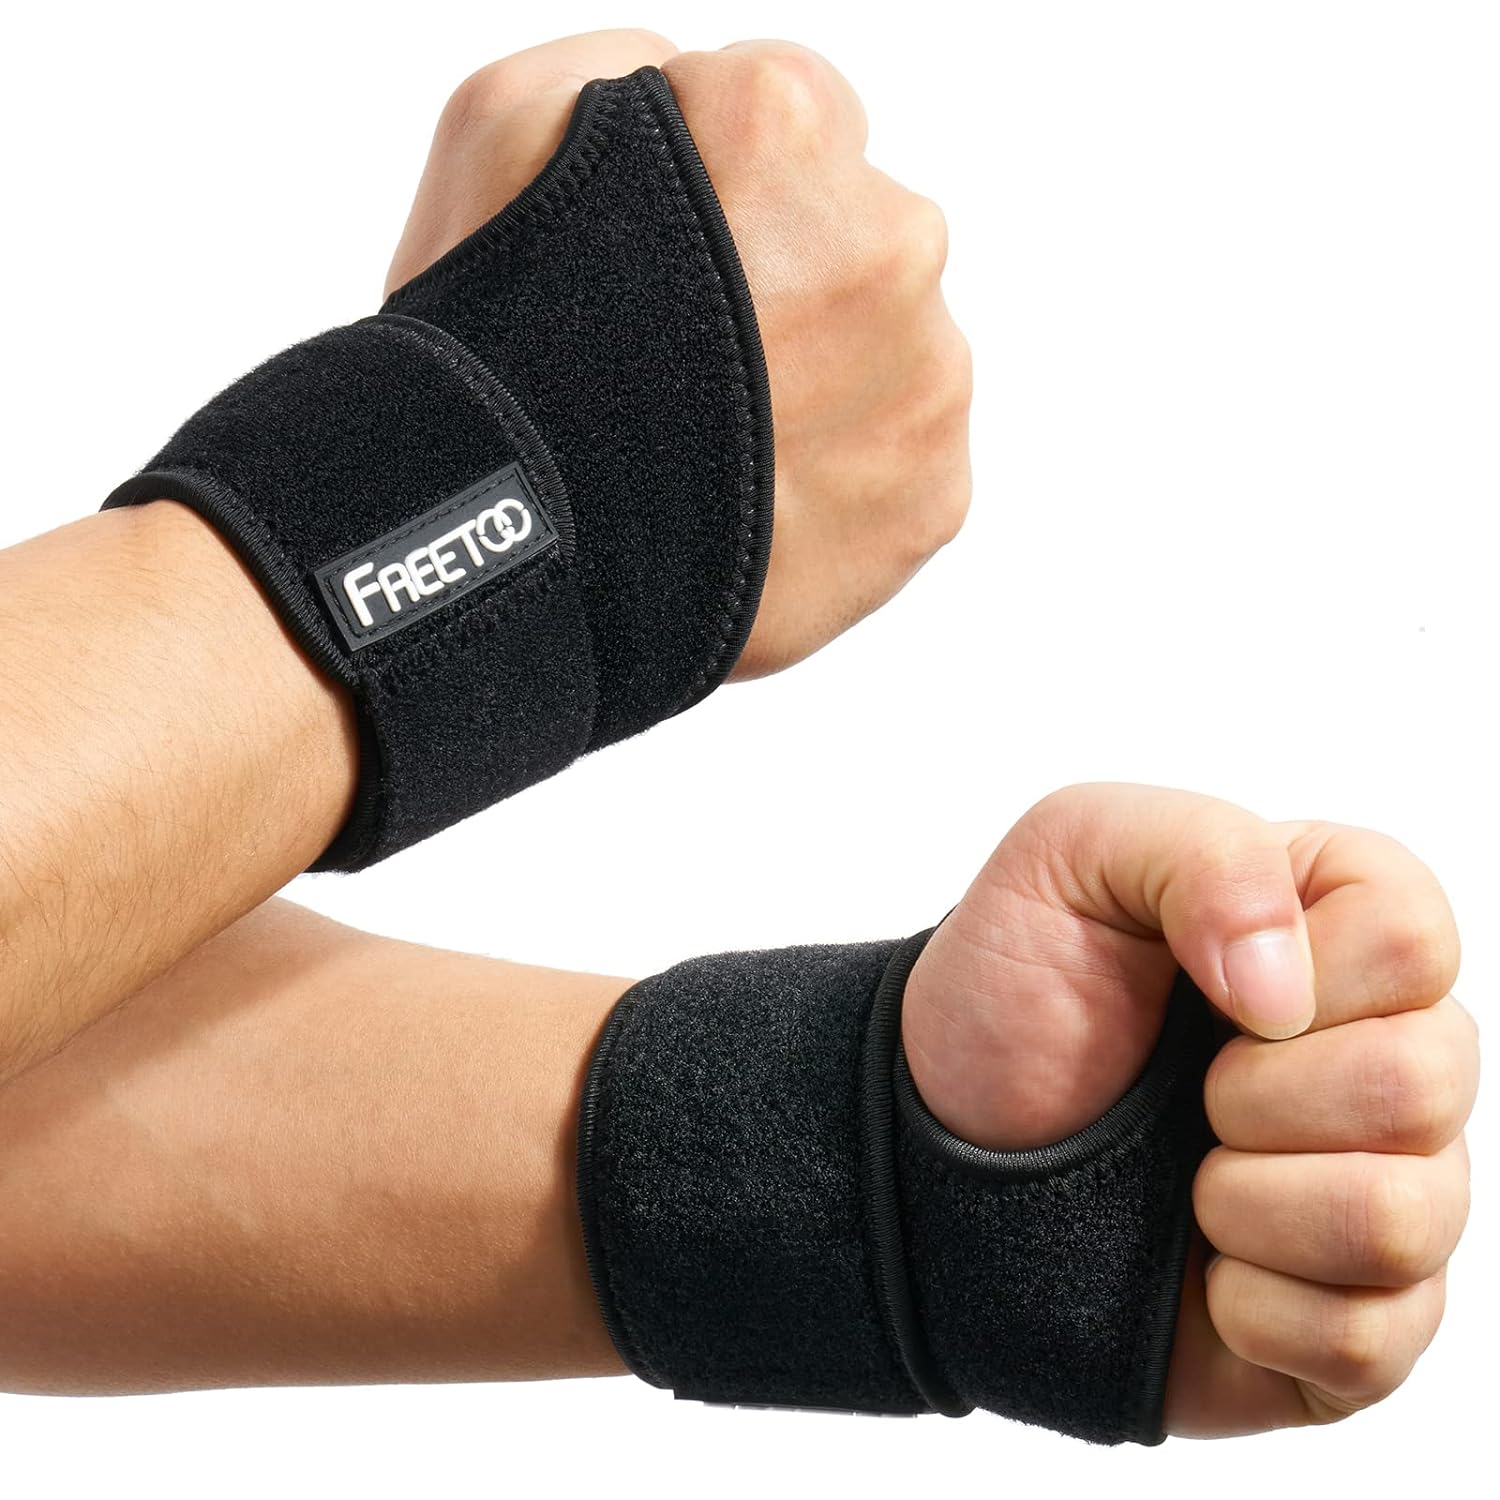 Compression Wrist Support Review